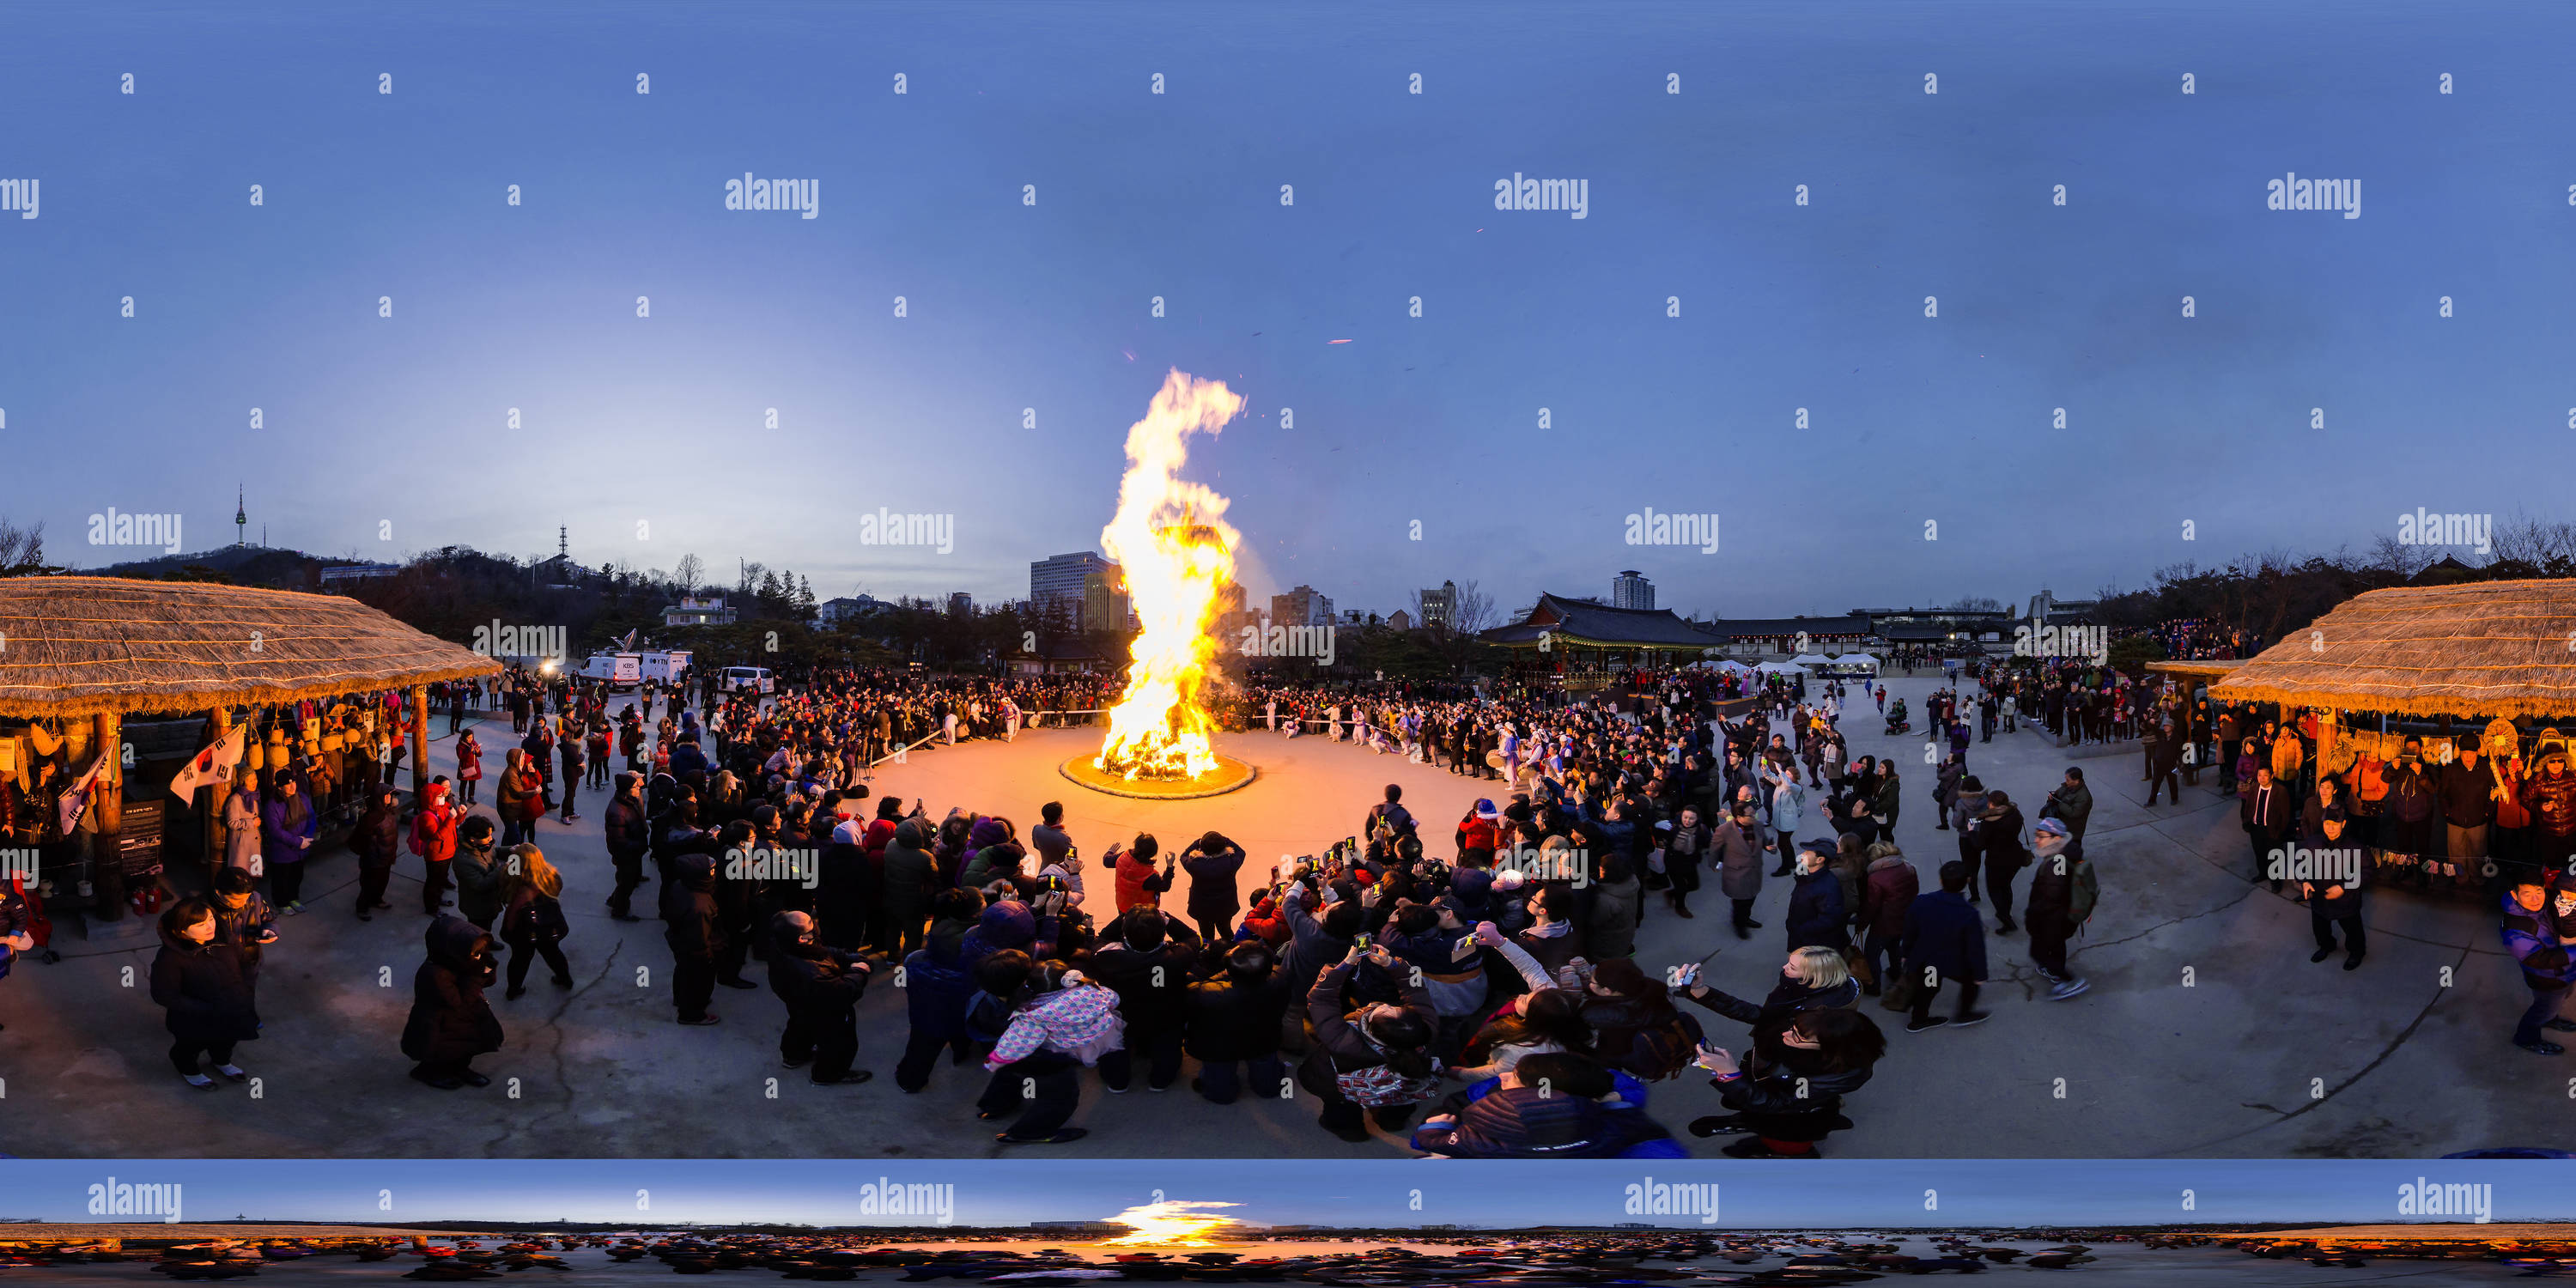 360° view of The First Full Moon Festival Alamy